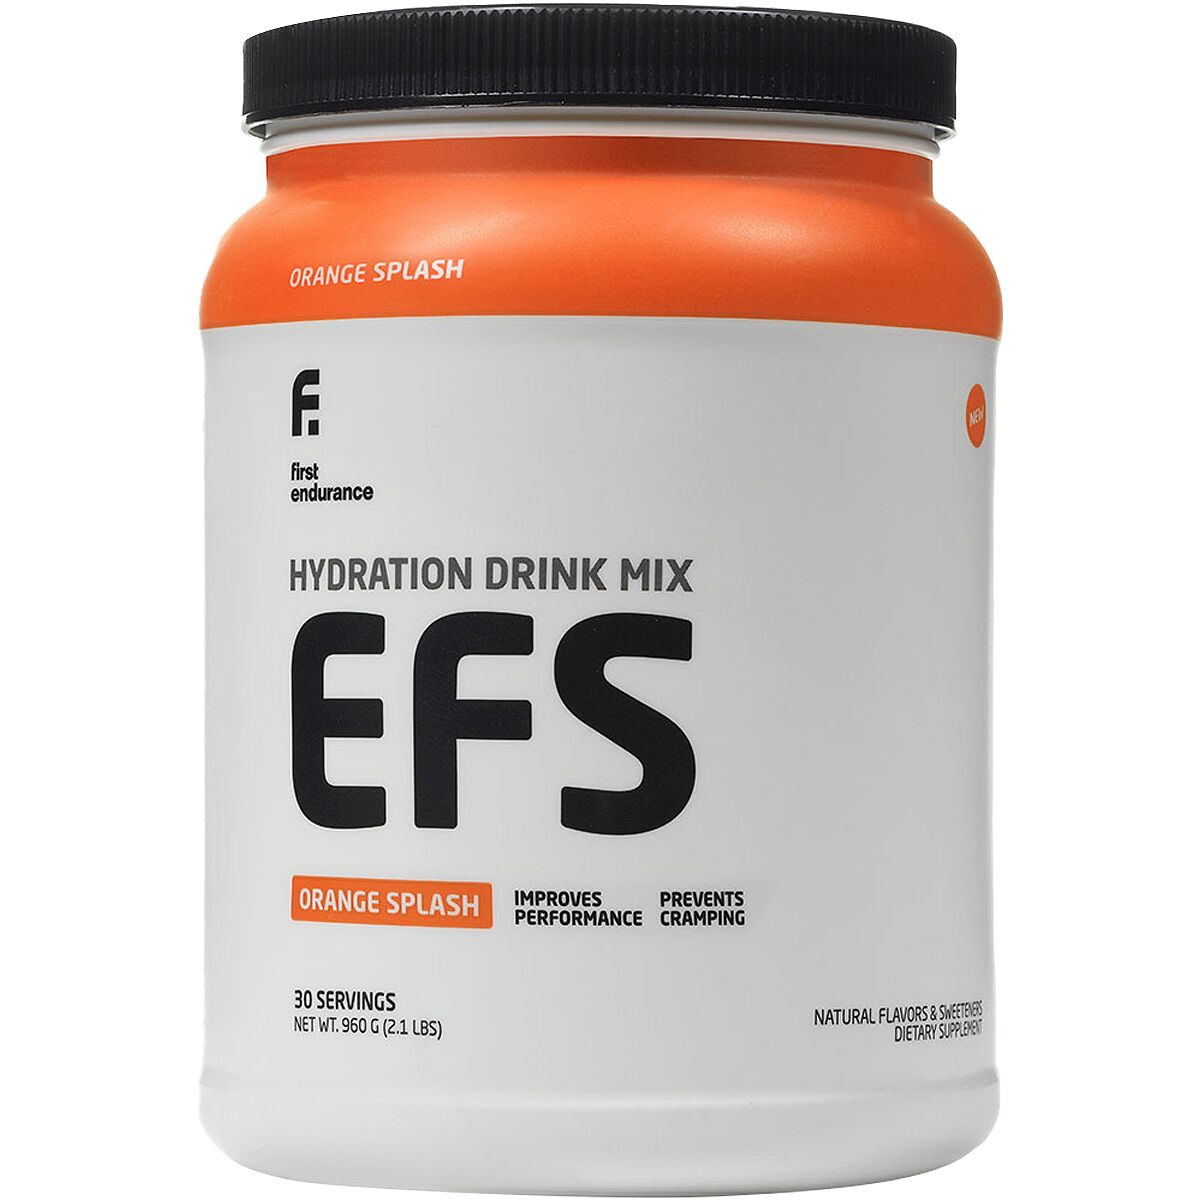 First Endurance EFS Energy and Endurance Drink Mix - 30 Servings